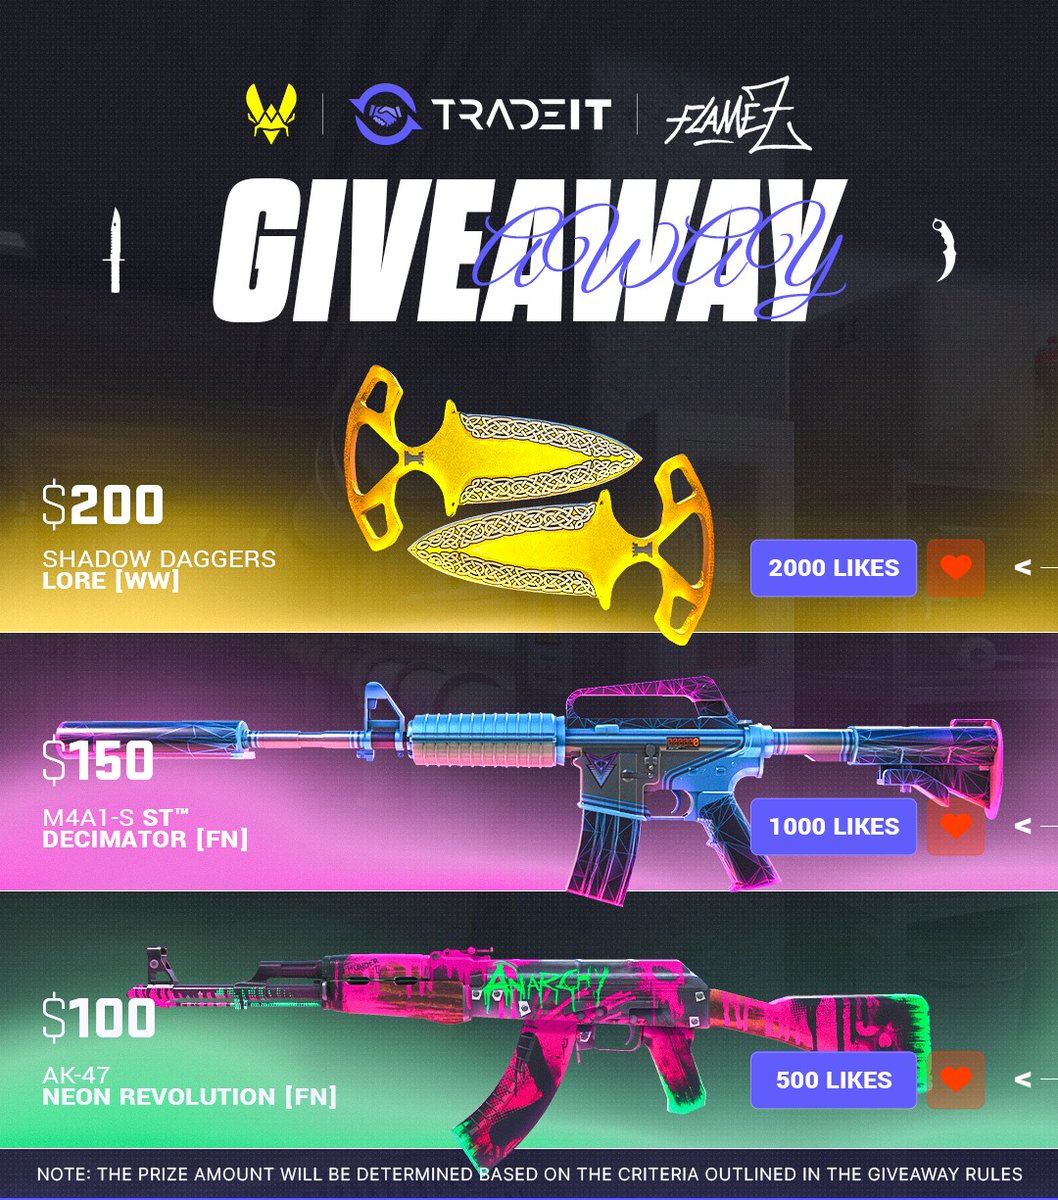 The prize depends on the number of likes we can get on this tweet, so get liking 🔥 To enter: - Like & RT this post - Follow me and @tradeit_gg - Tag 2 friends End in one week, GL! #TradeitPartner